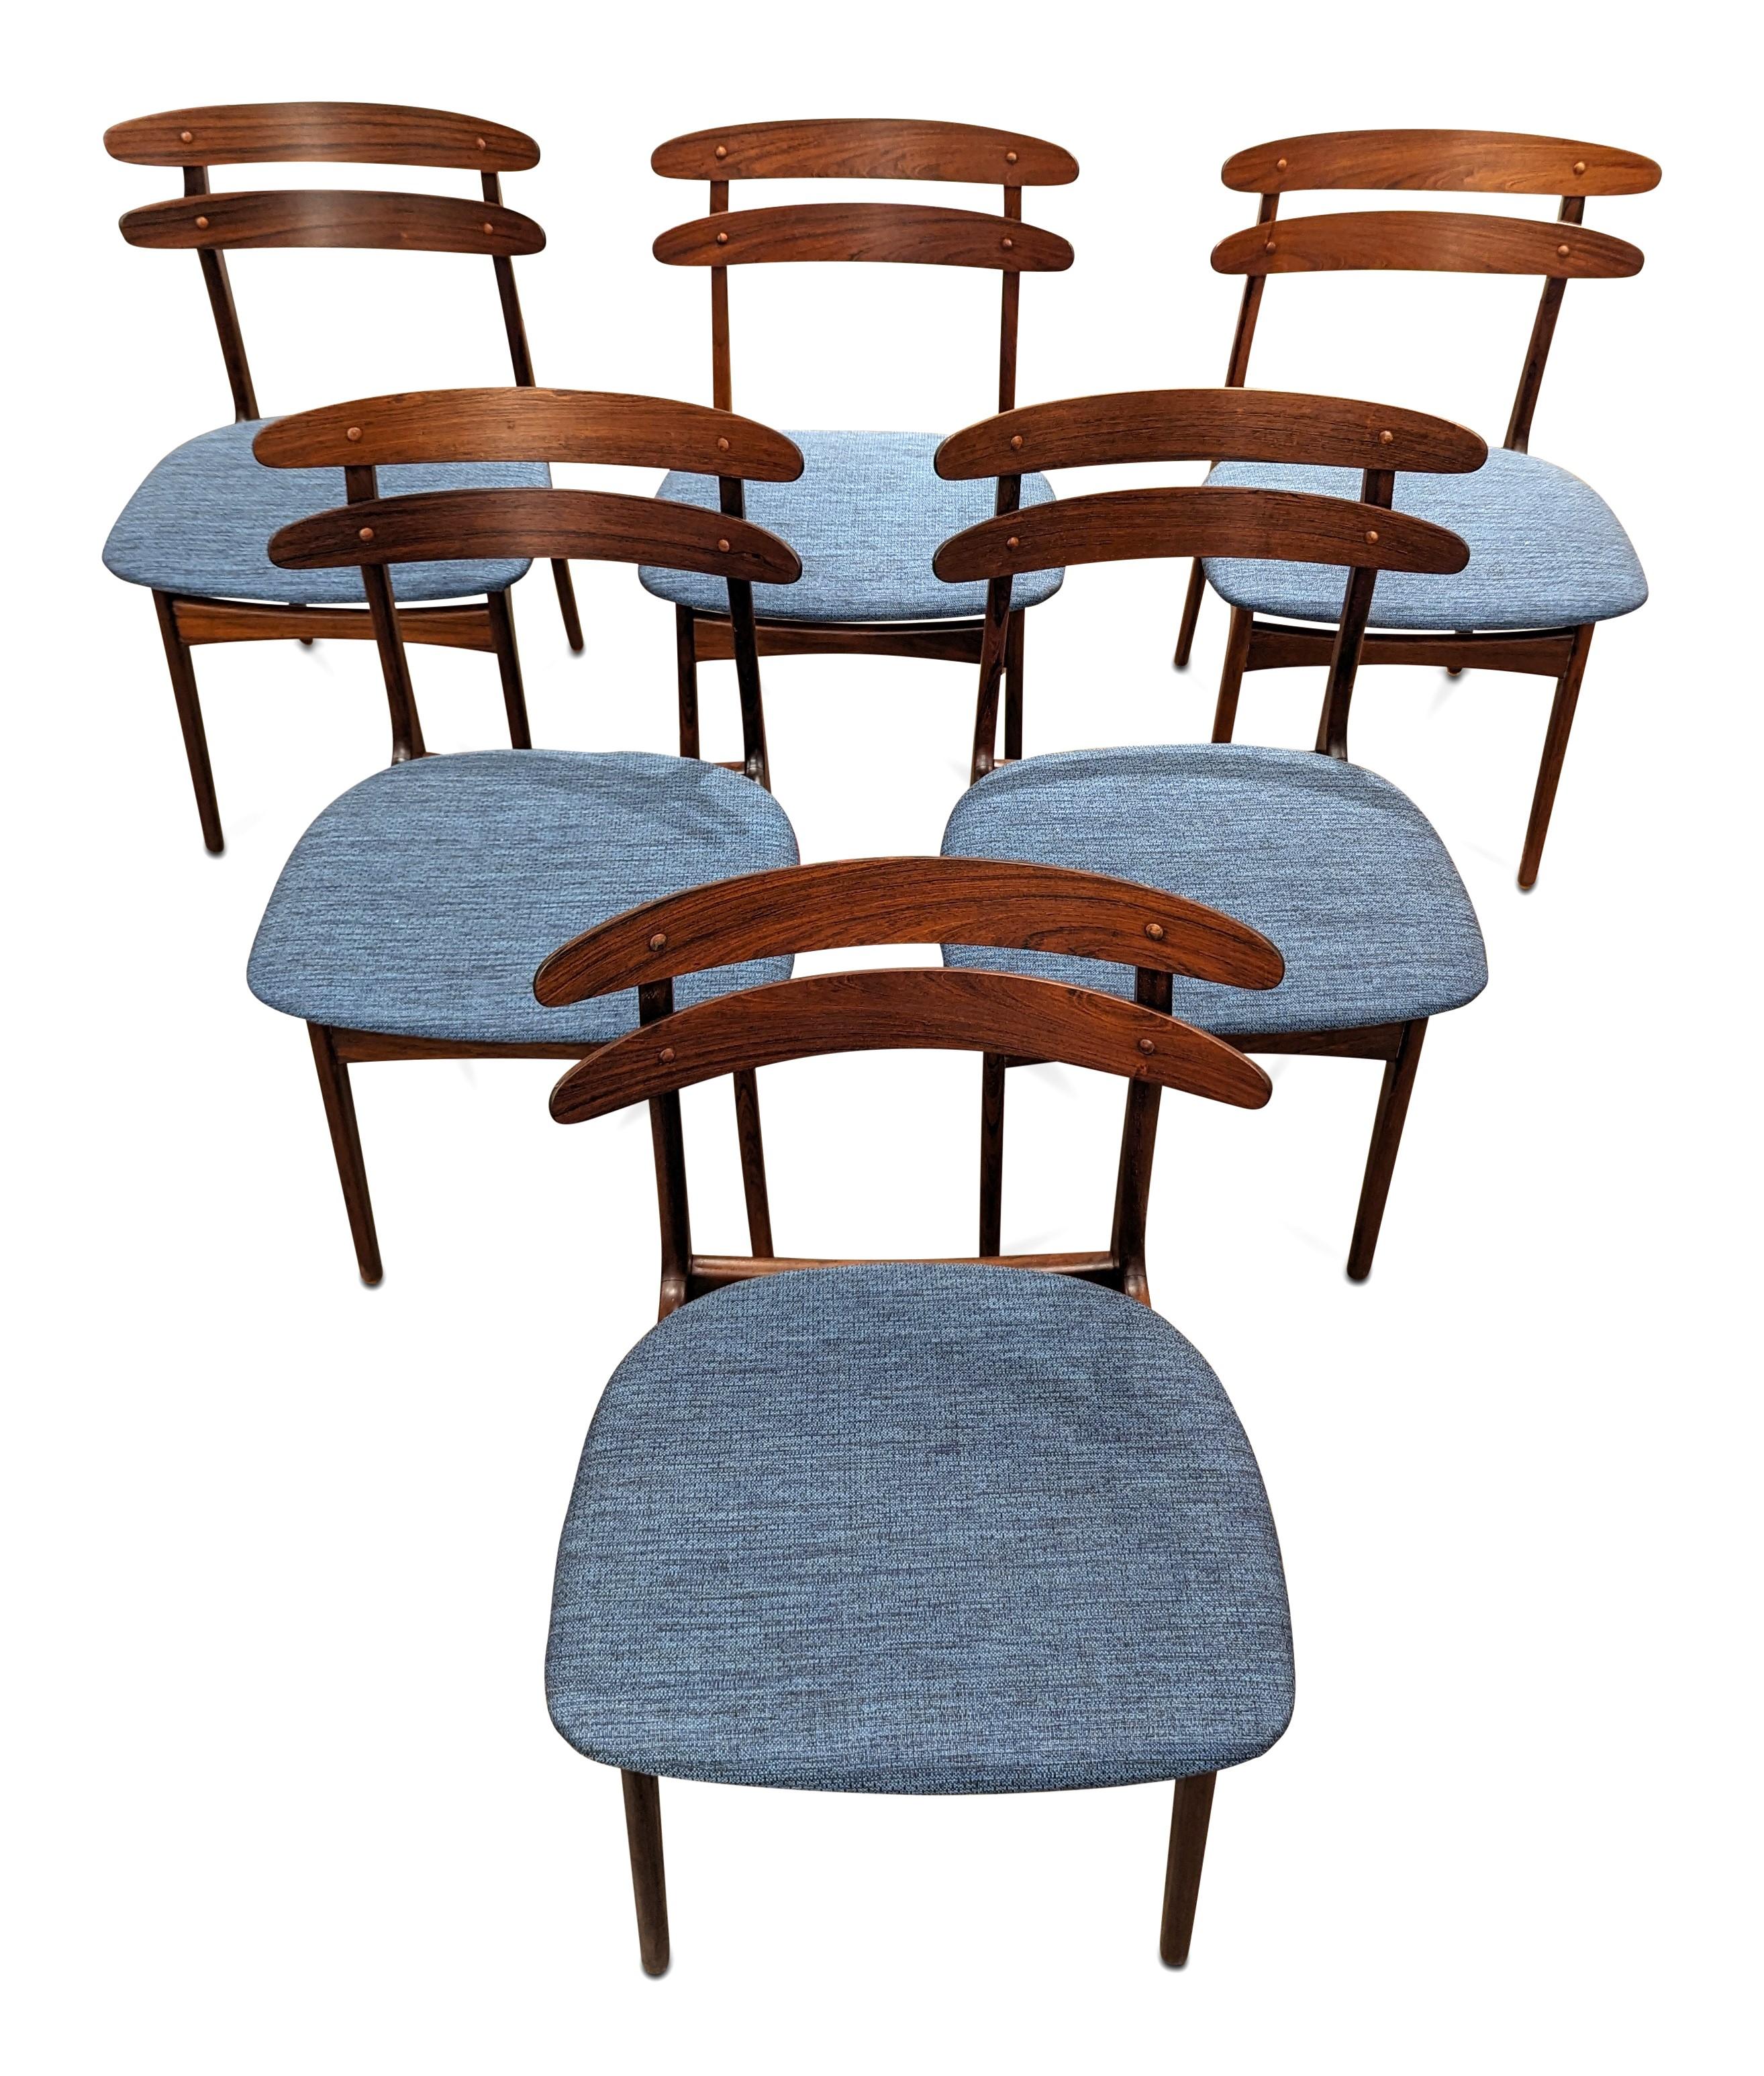 6 Rosewood Dining Chairs - 022483 Vintage Danish Mid Century 4